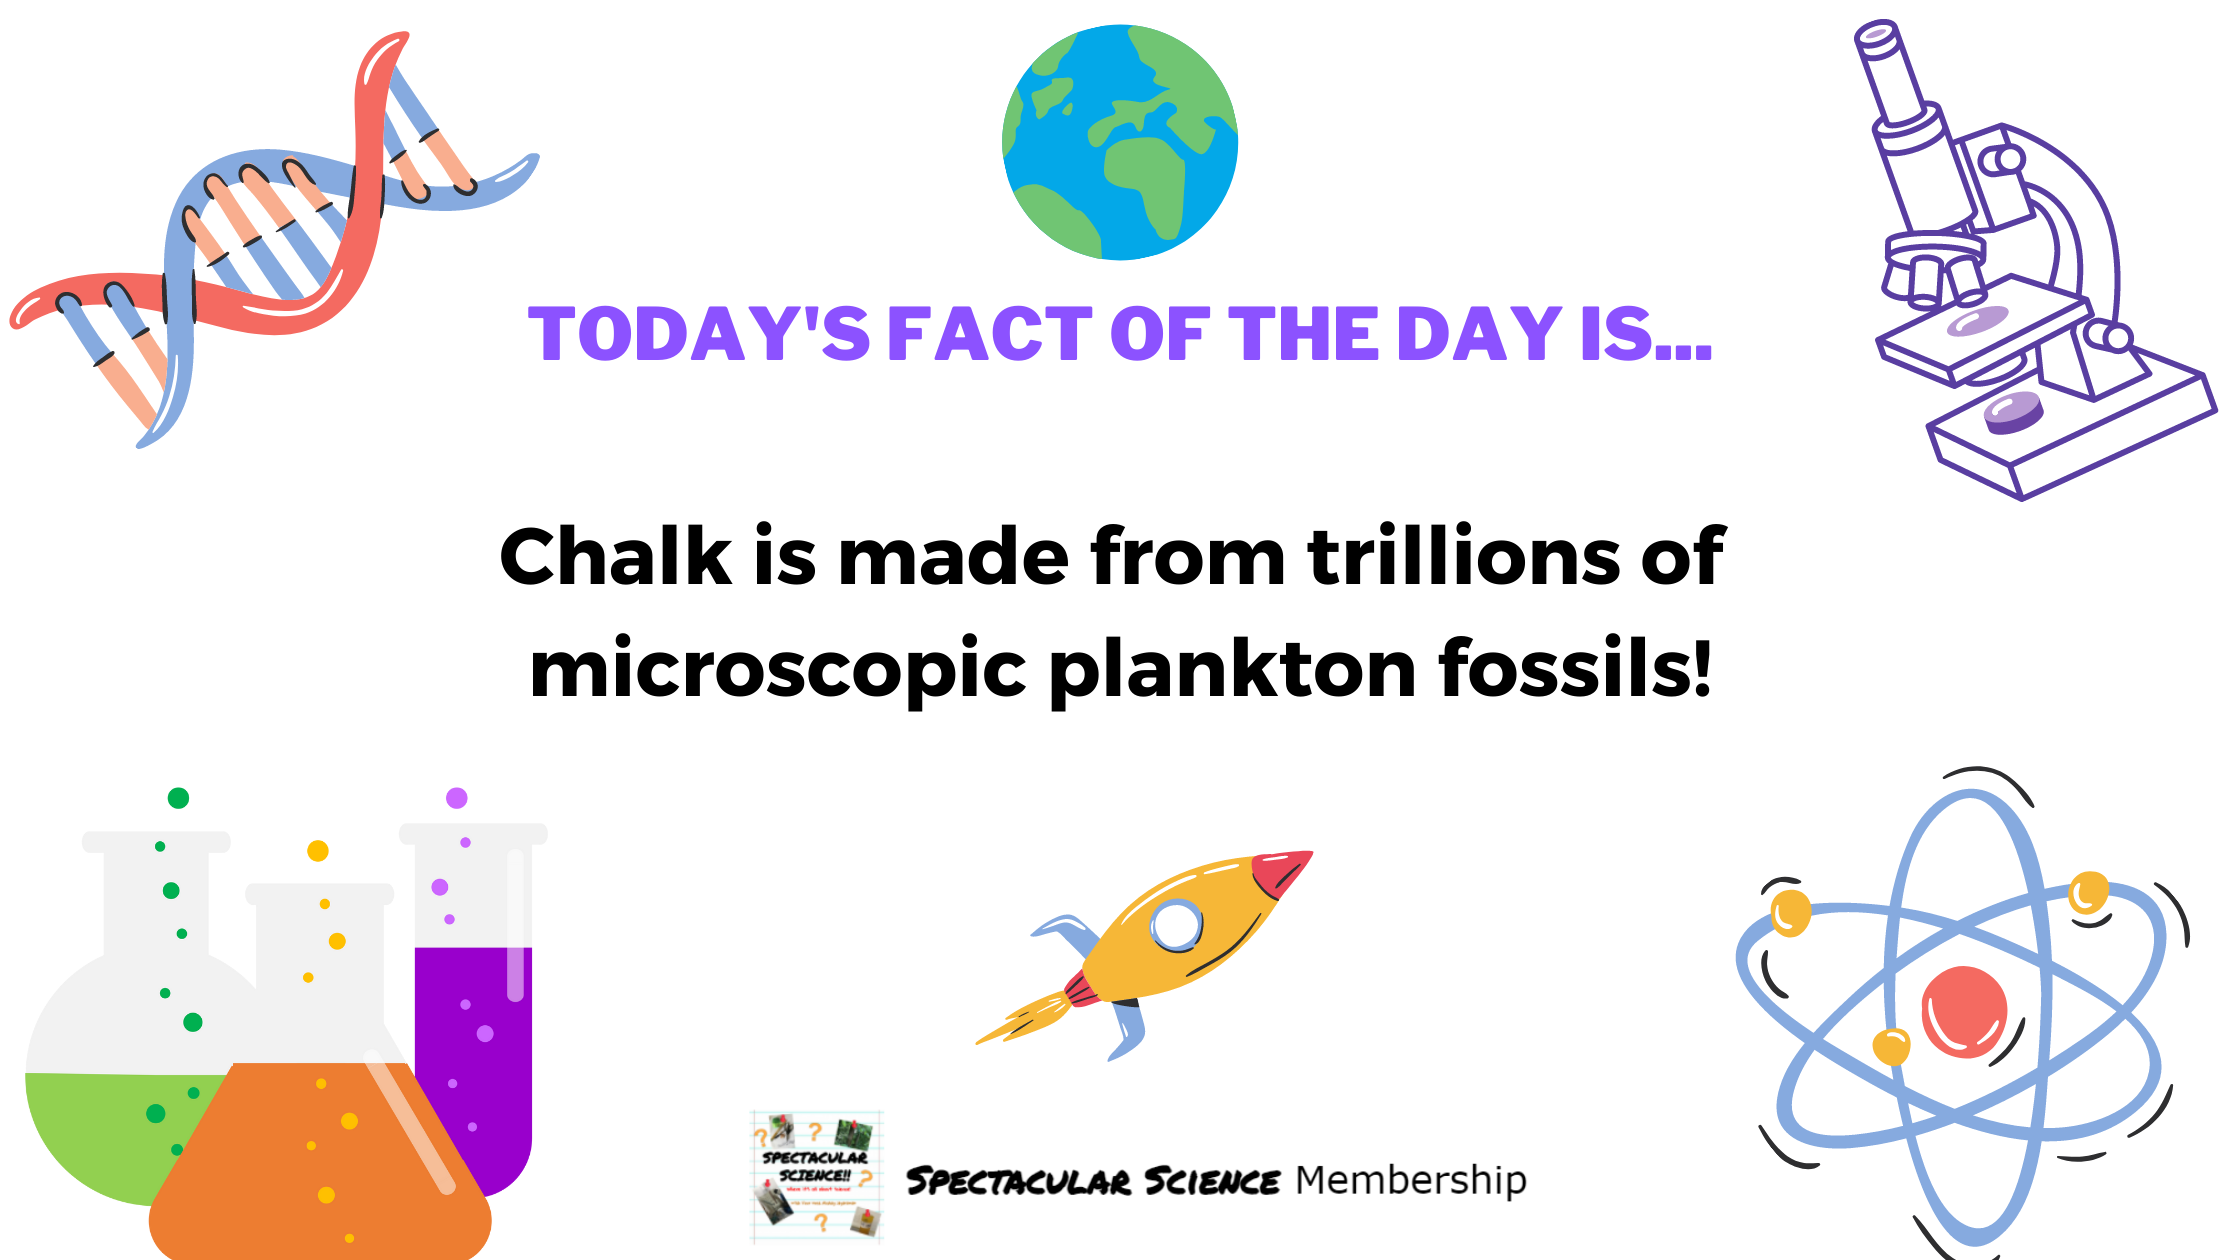 Fact of the Day Image Feb. 10th